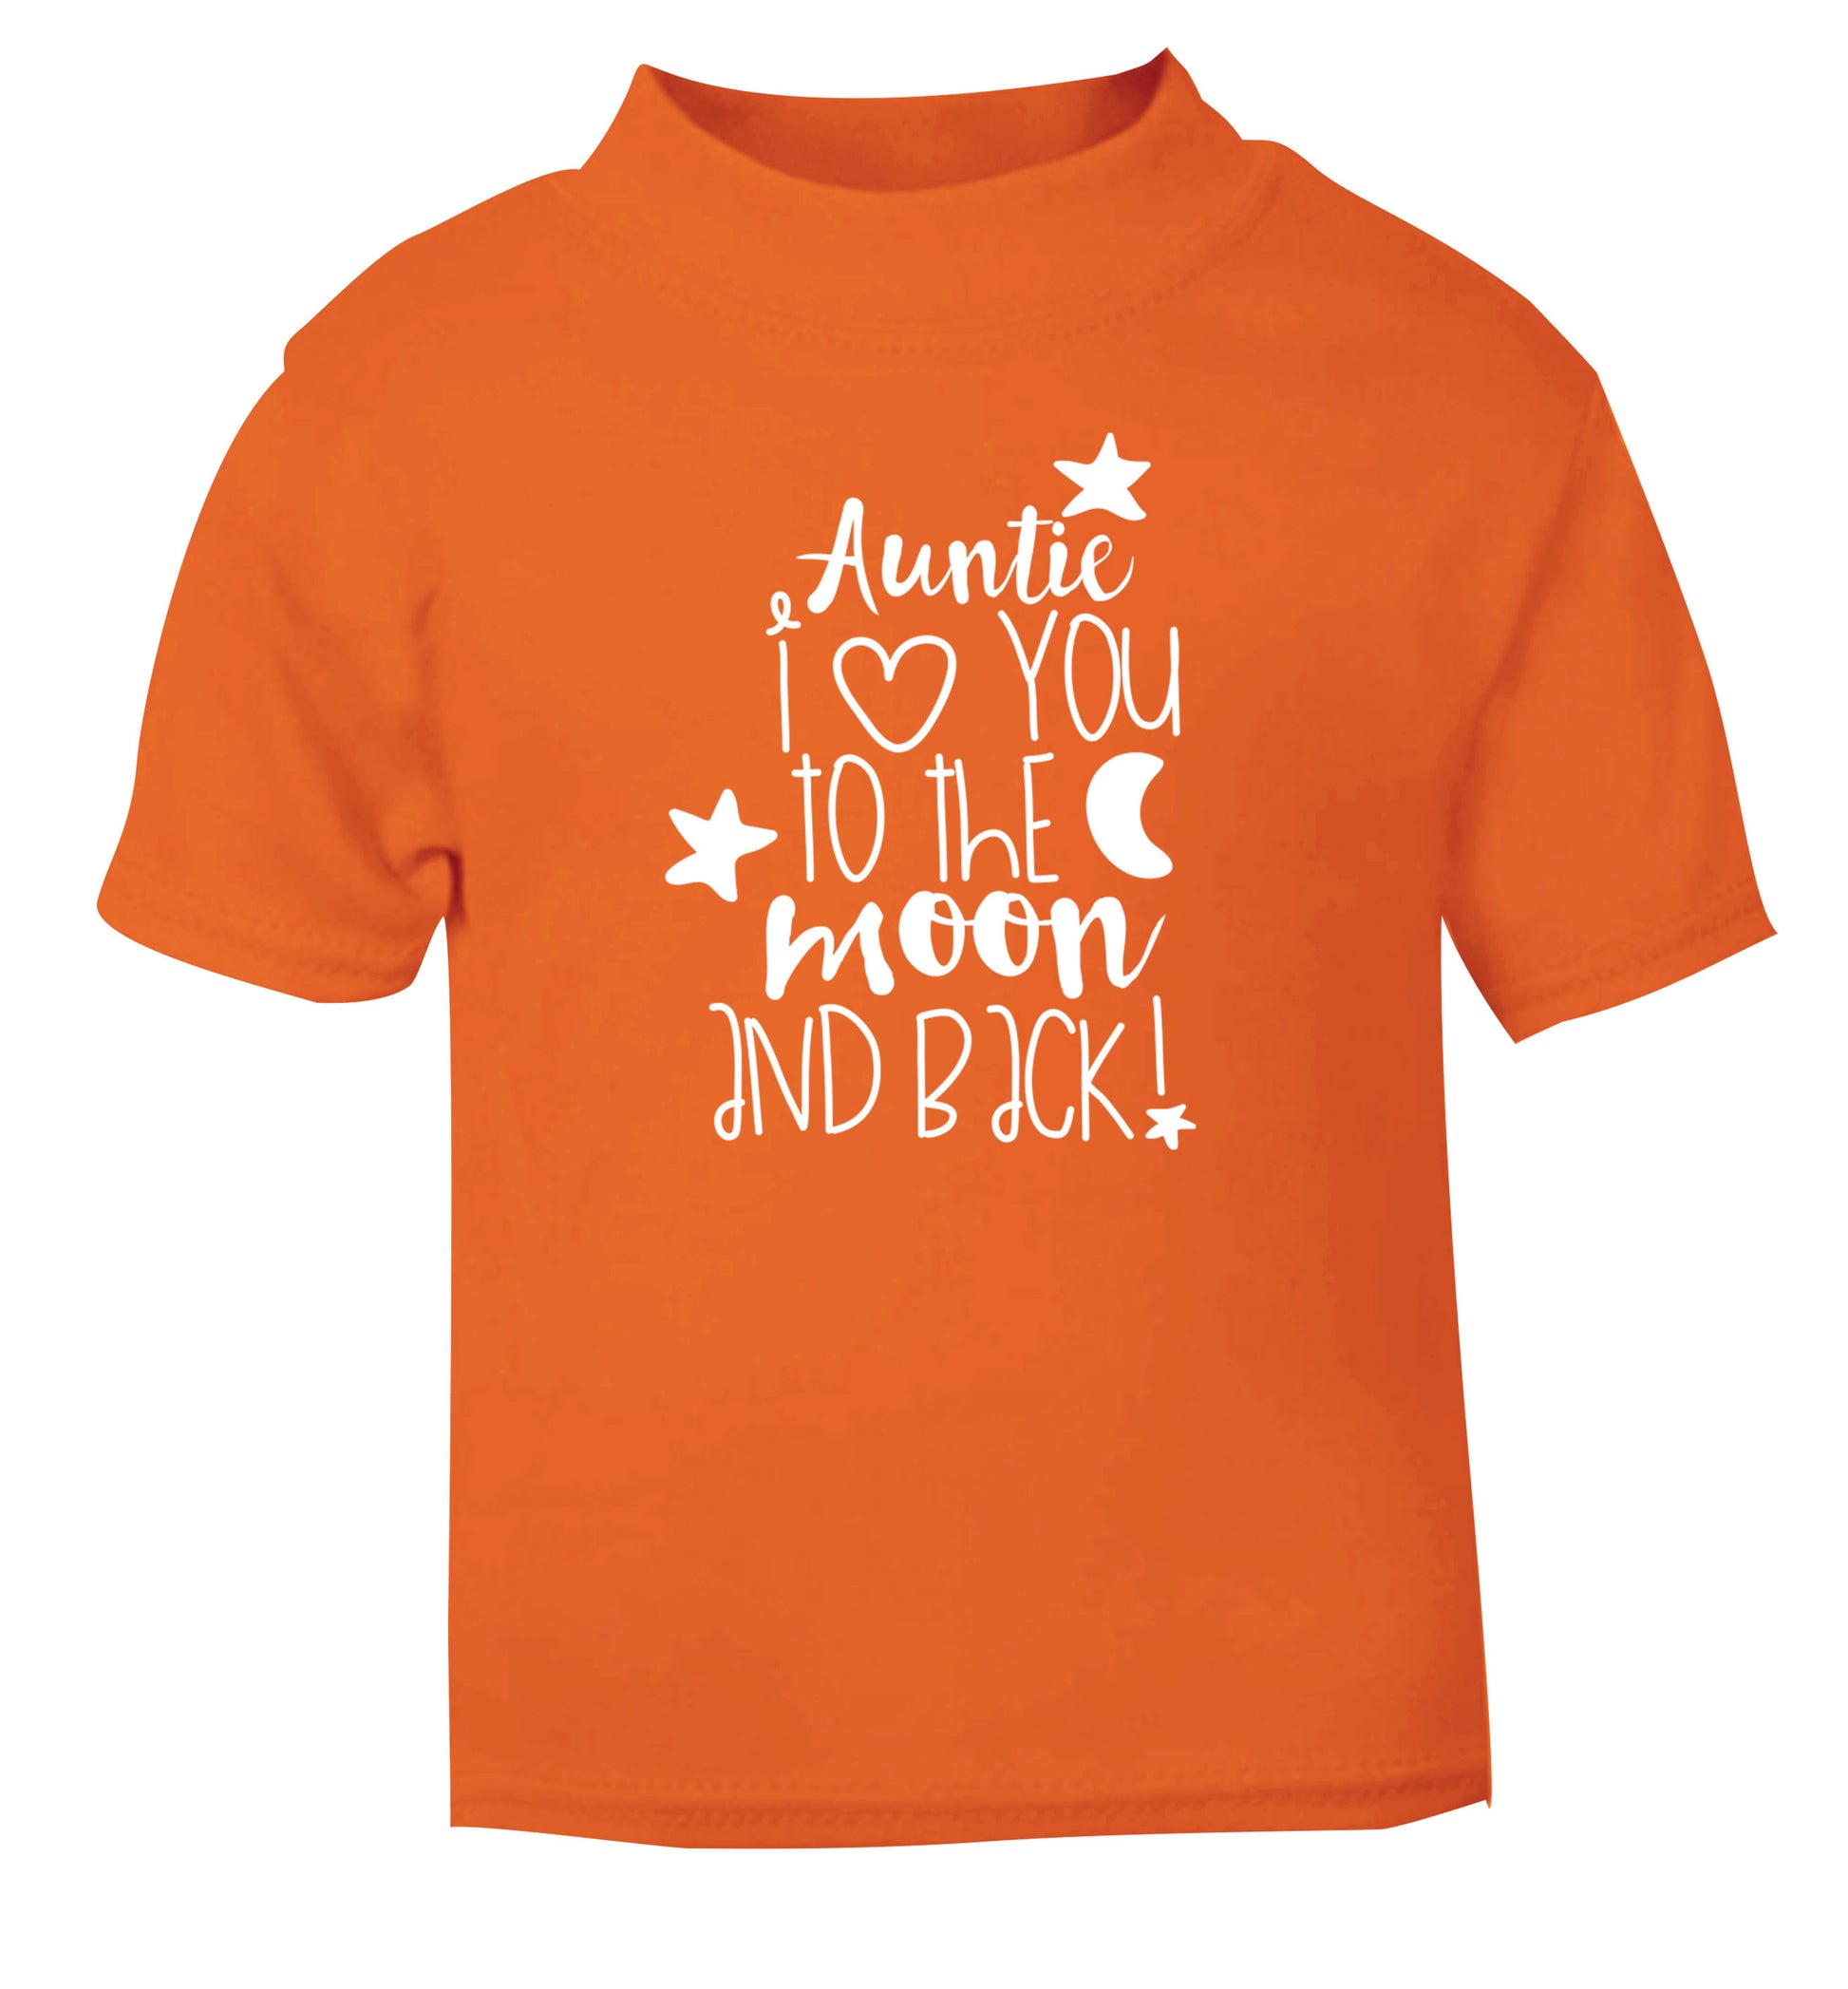 Auntie I love you to the moon and back orange Baby Toddler Tshirt 2 Years